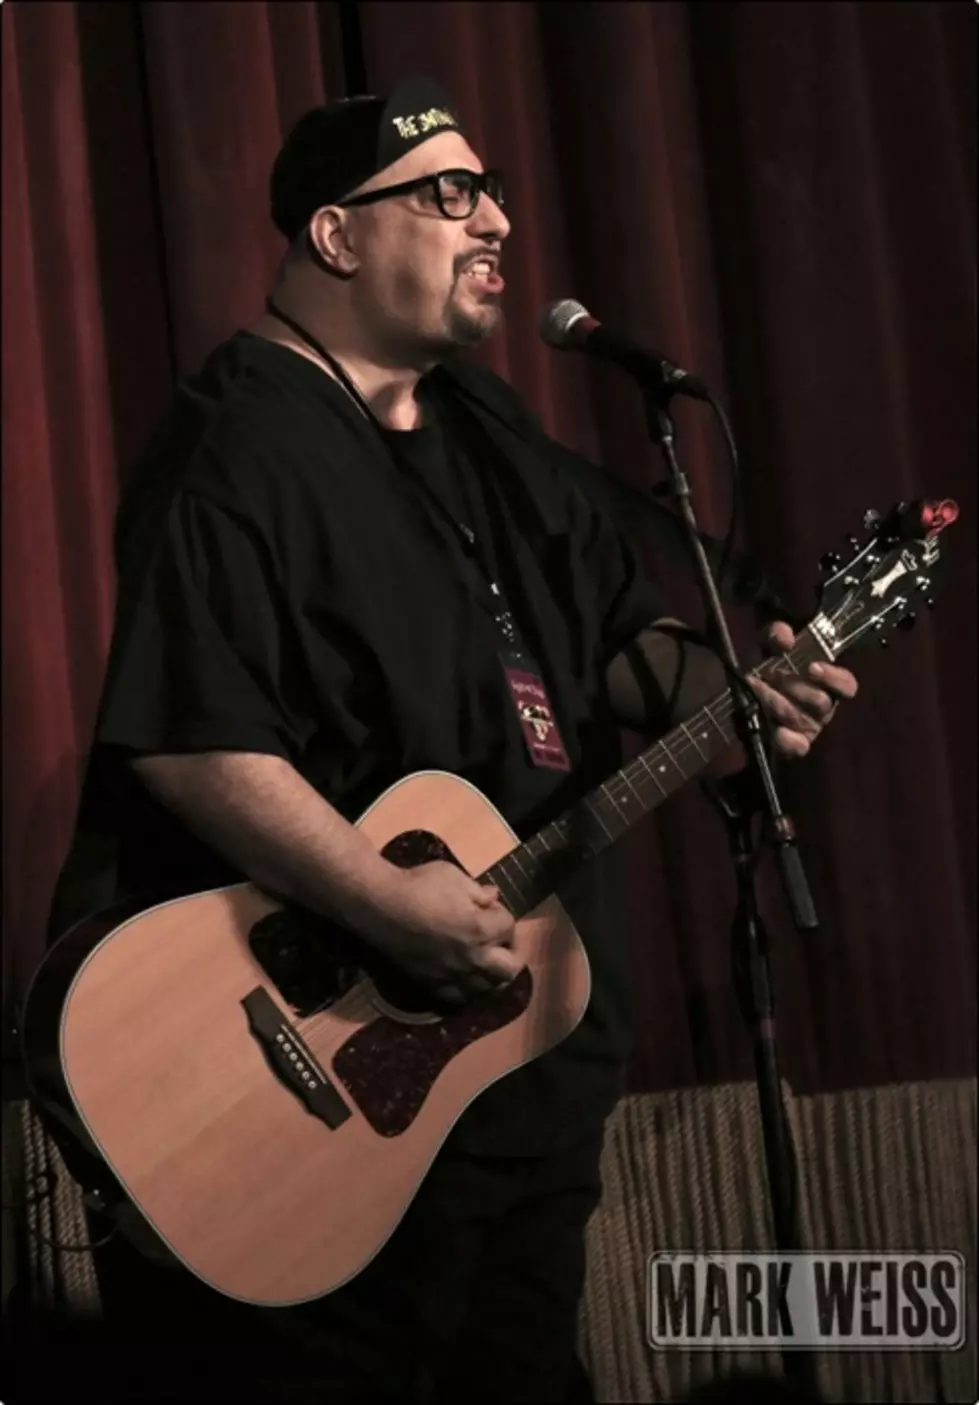 Pat DiNizio was a musician New Jerseyans &#8216;could connect with&#8217;